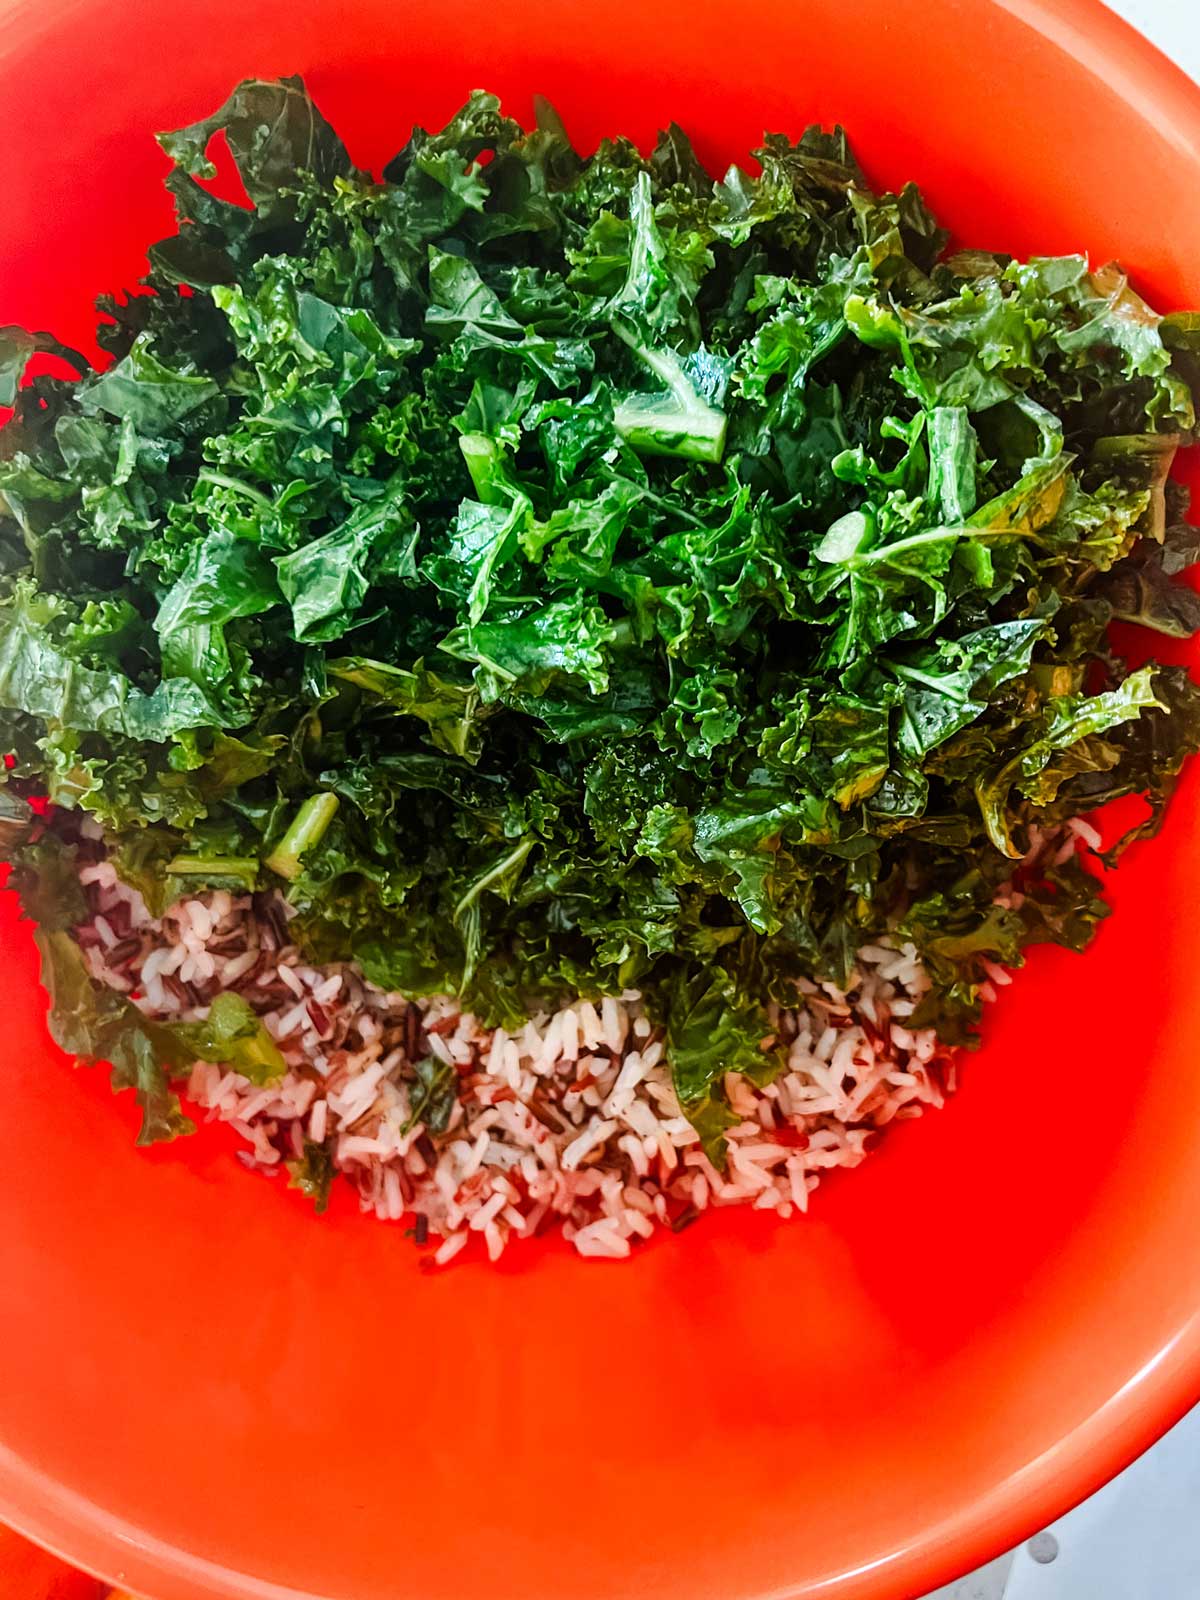 Wild rice and kale in a bowl.